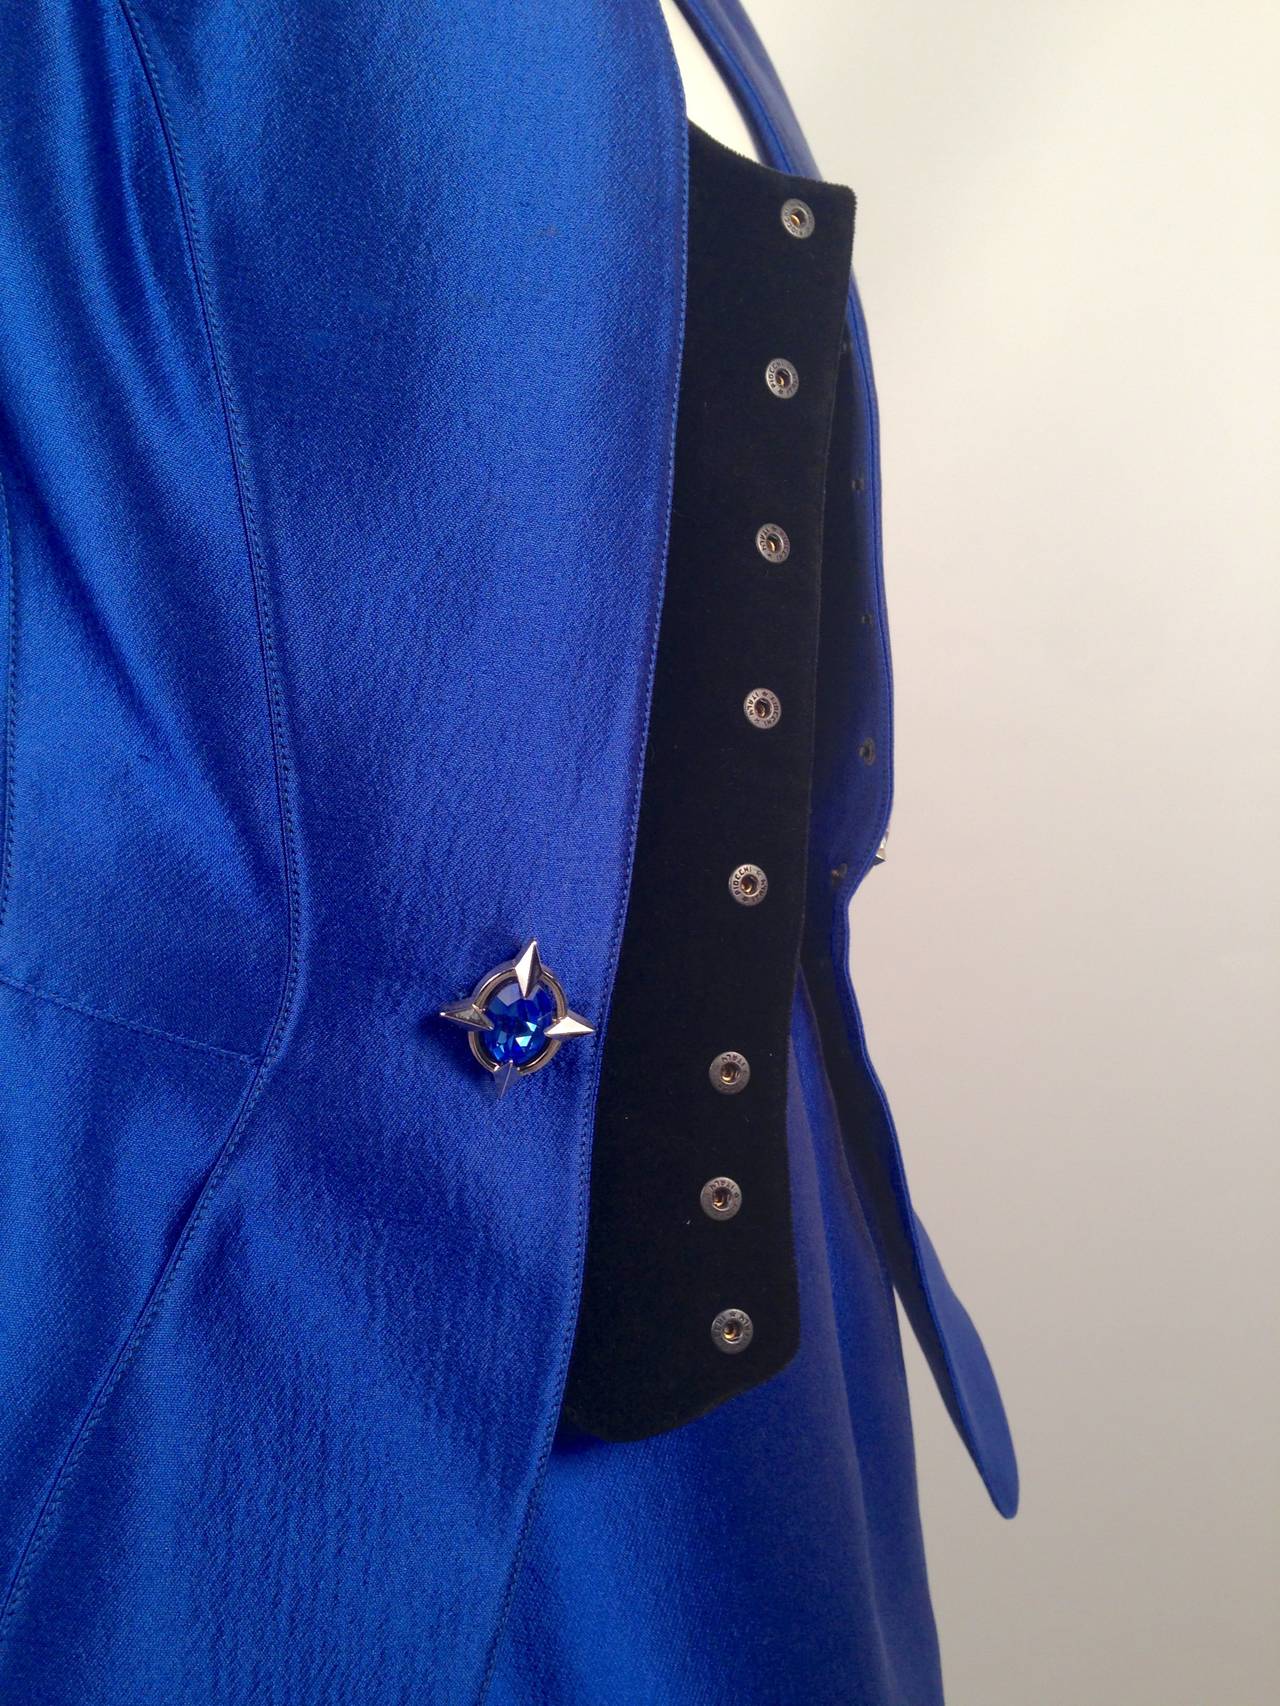 Vintage Thierry Mugler Electric Blue Skirt Suit For Sale 2